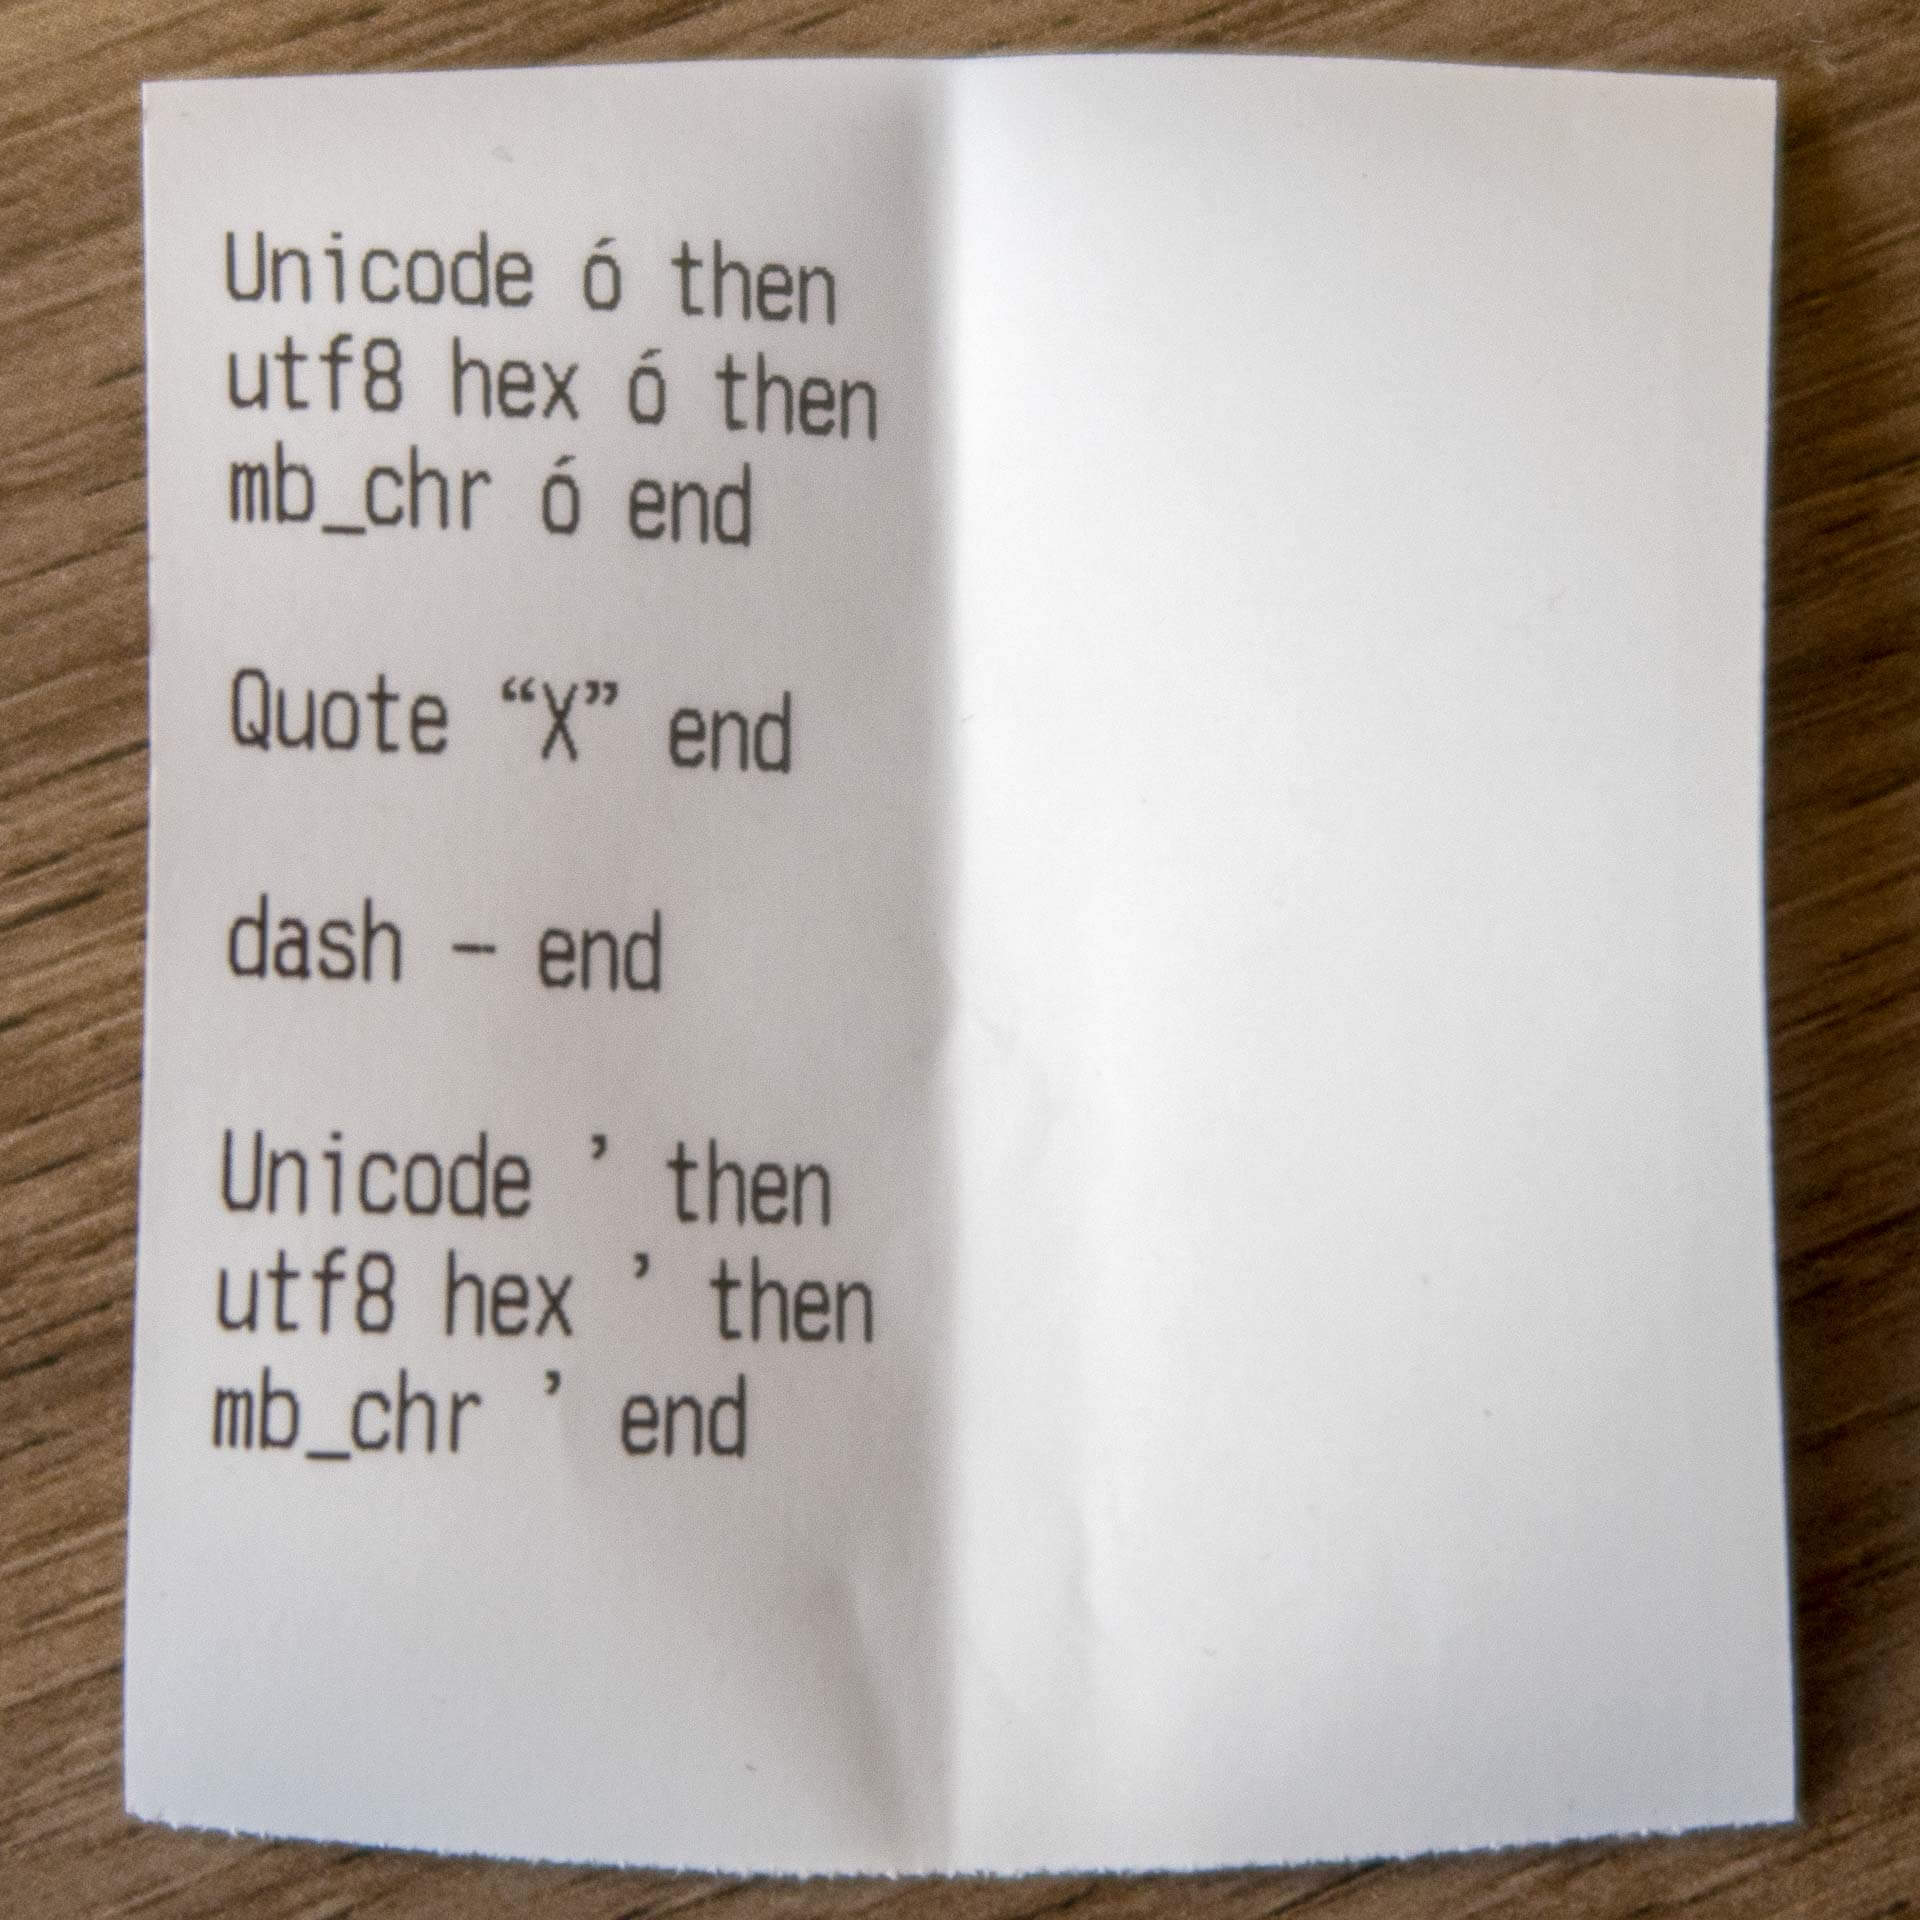 Printout of extended Unicode characters